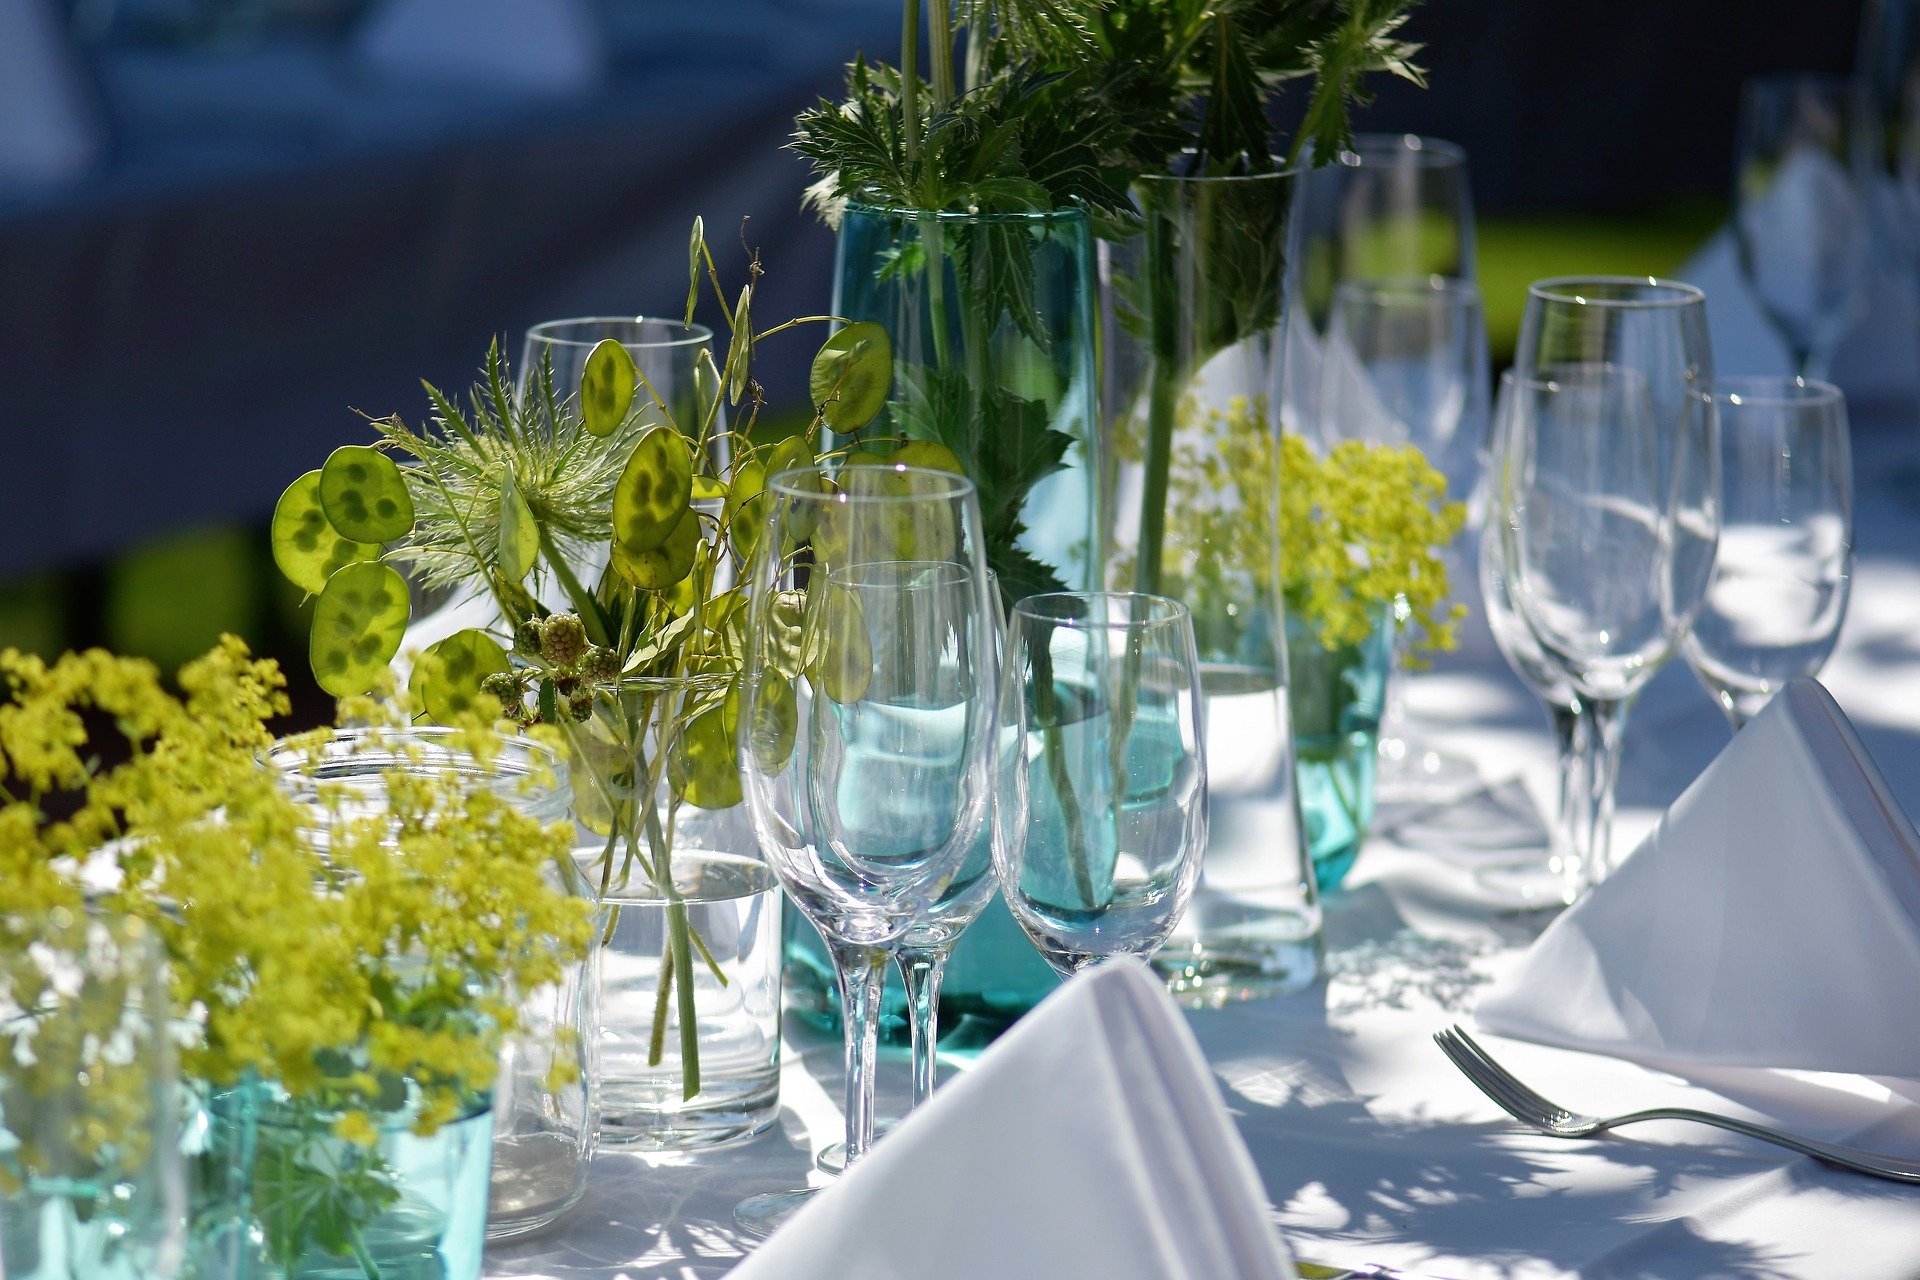 Decoration ideas for the perfect garden party